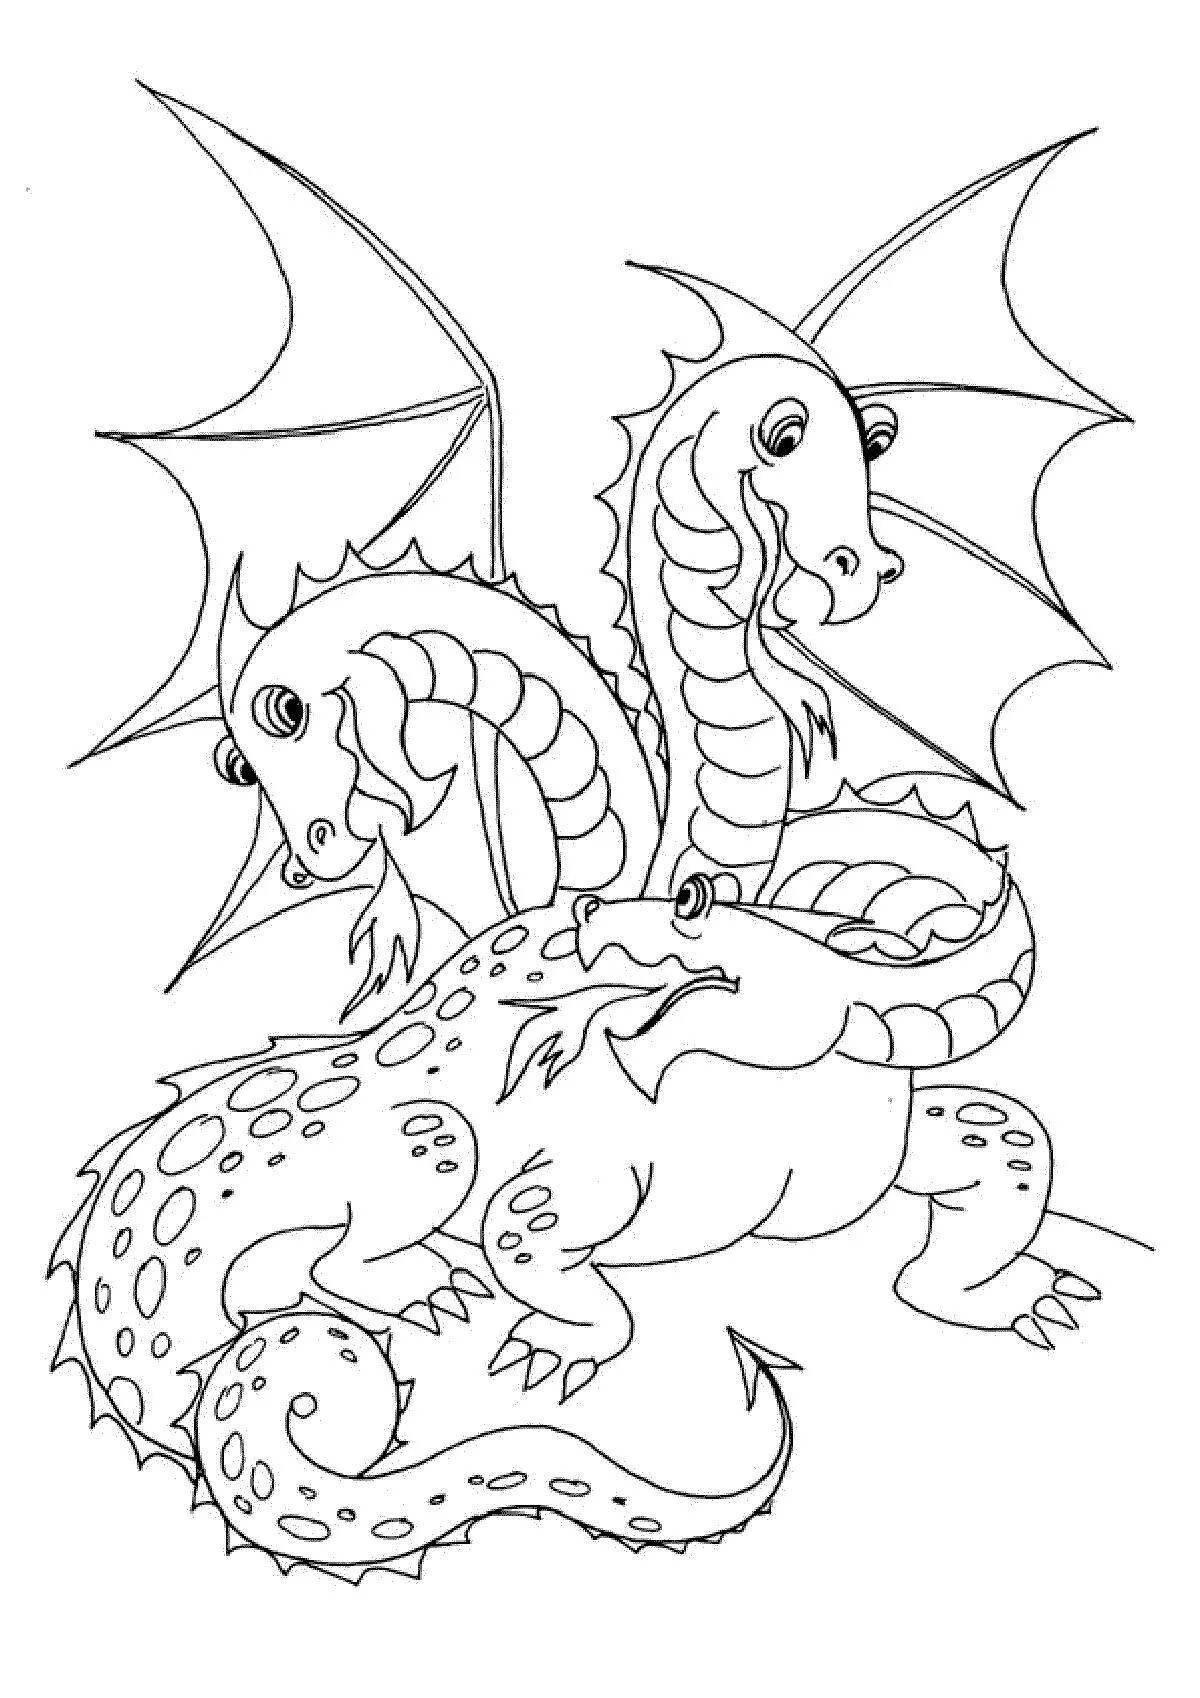 Detailed coloring page of the six-headed serpent